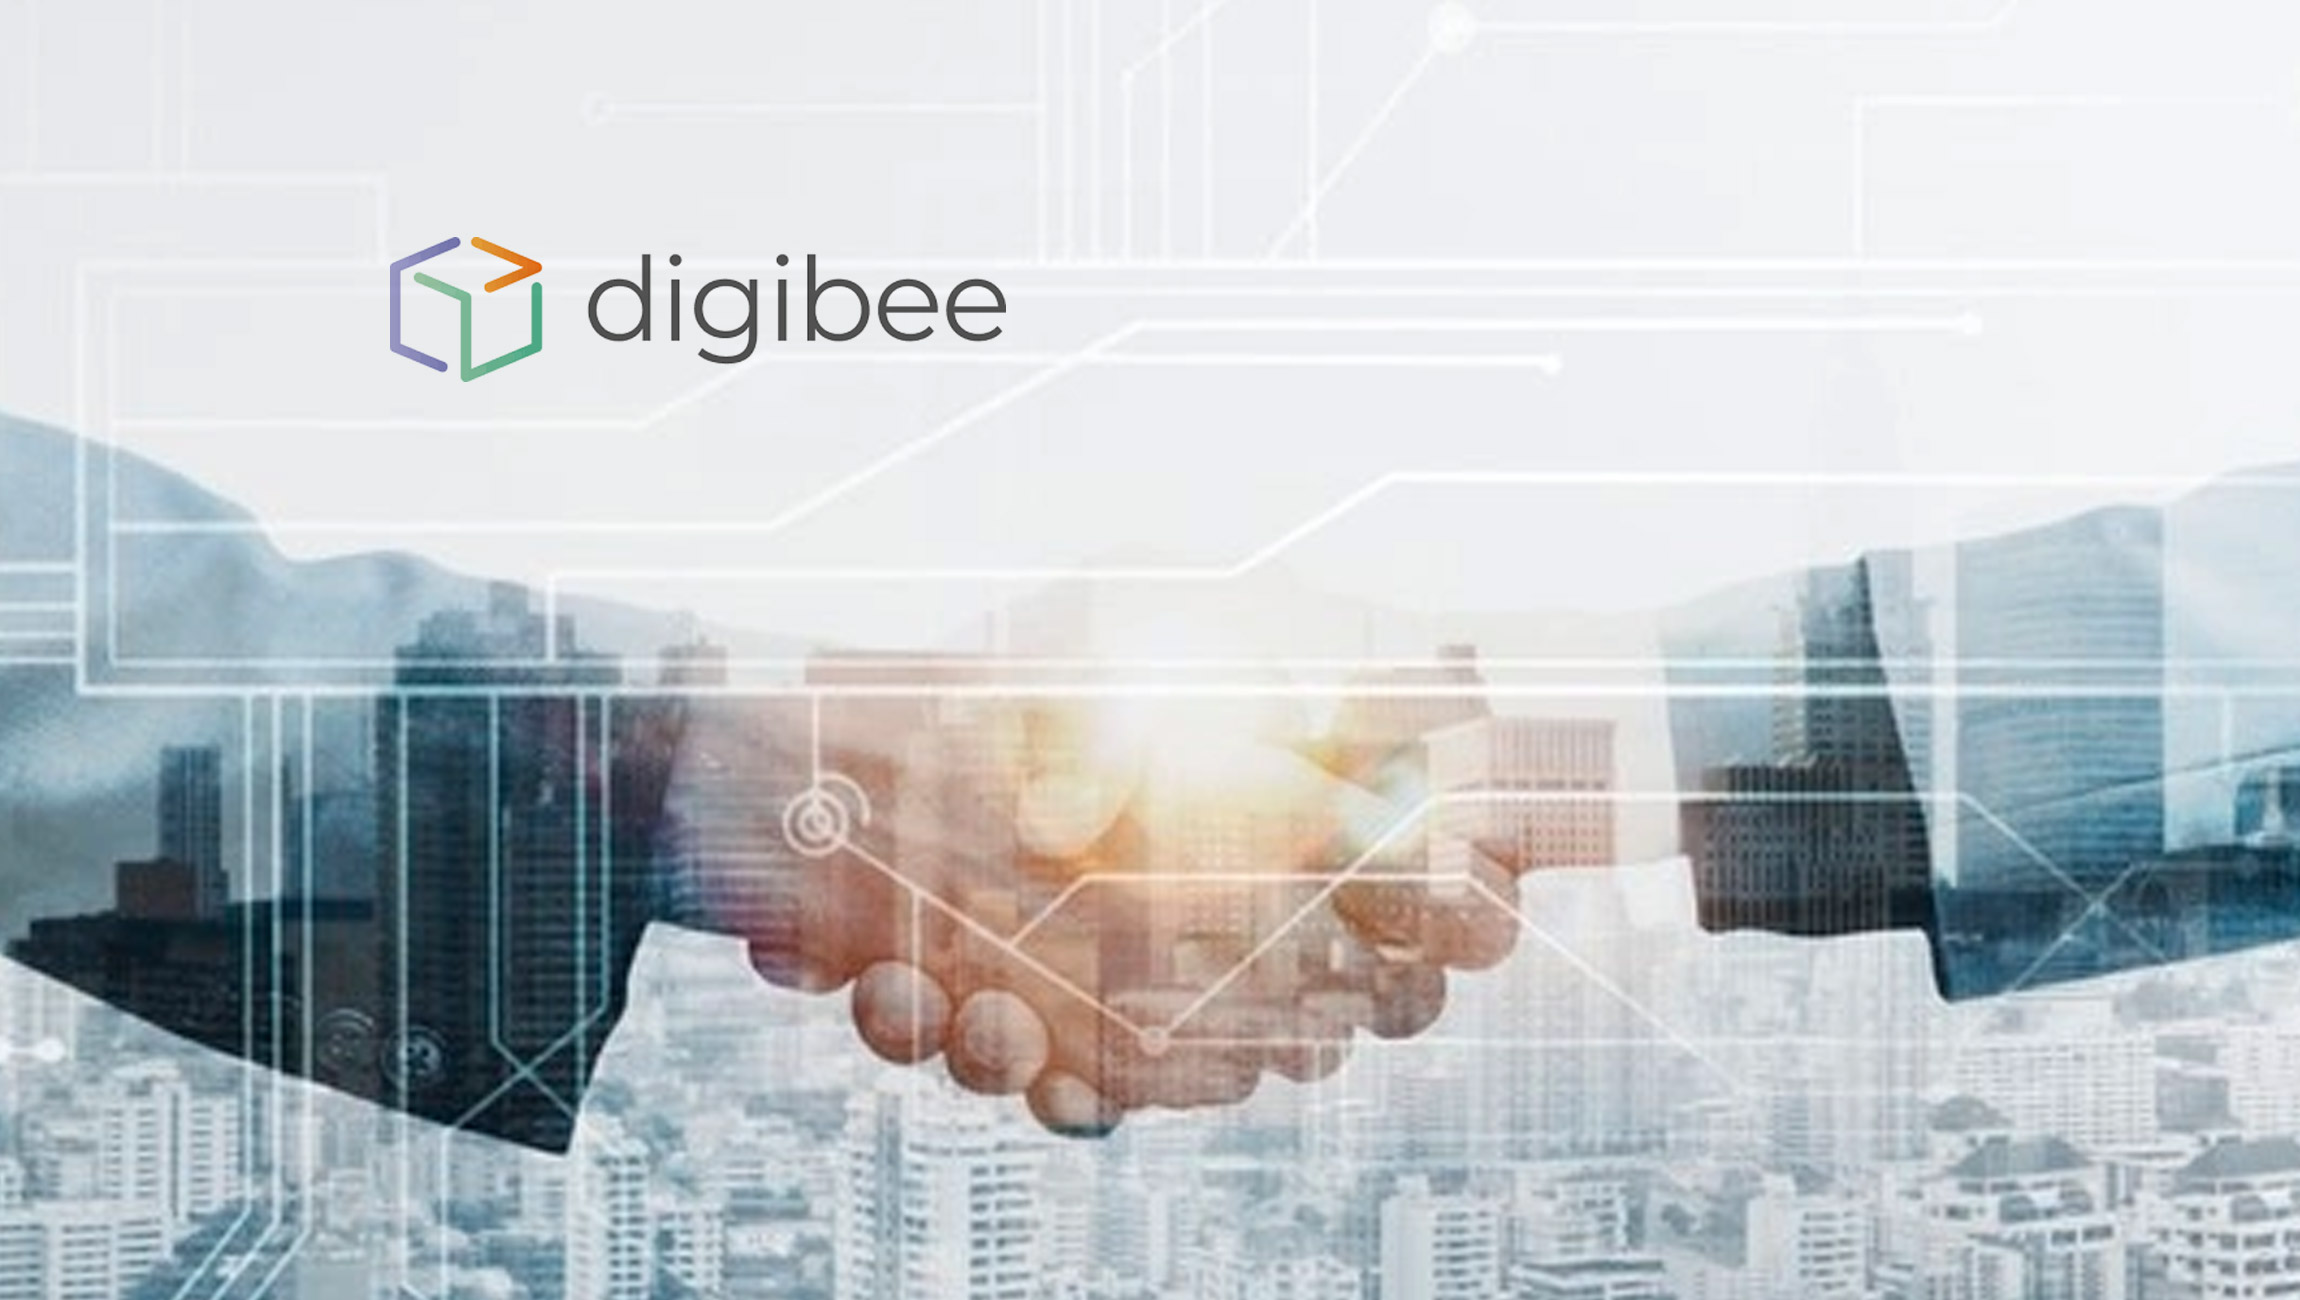 Digibee and Orasi Partner to Accelerate Digital Transformation and Control Integration Costs